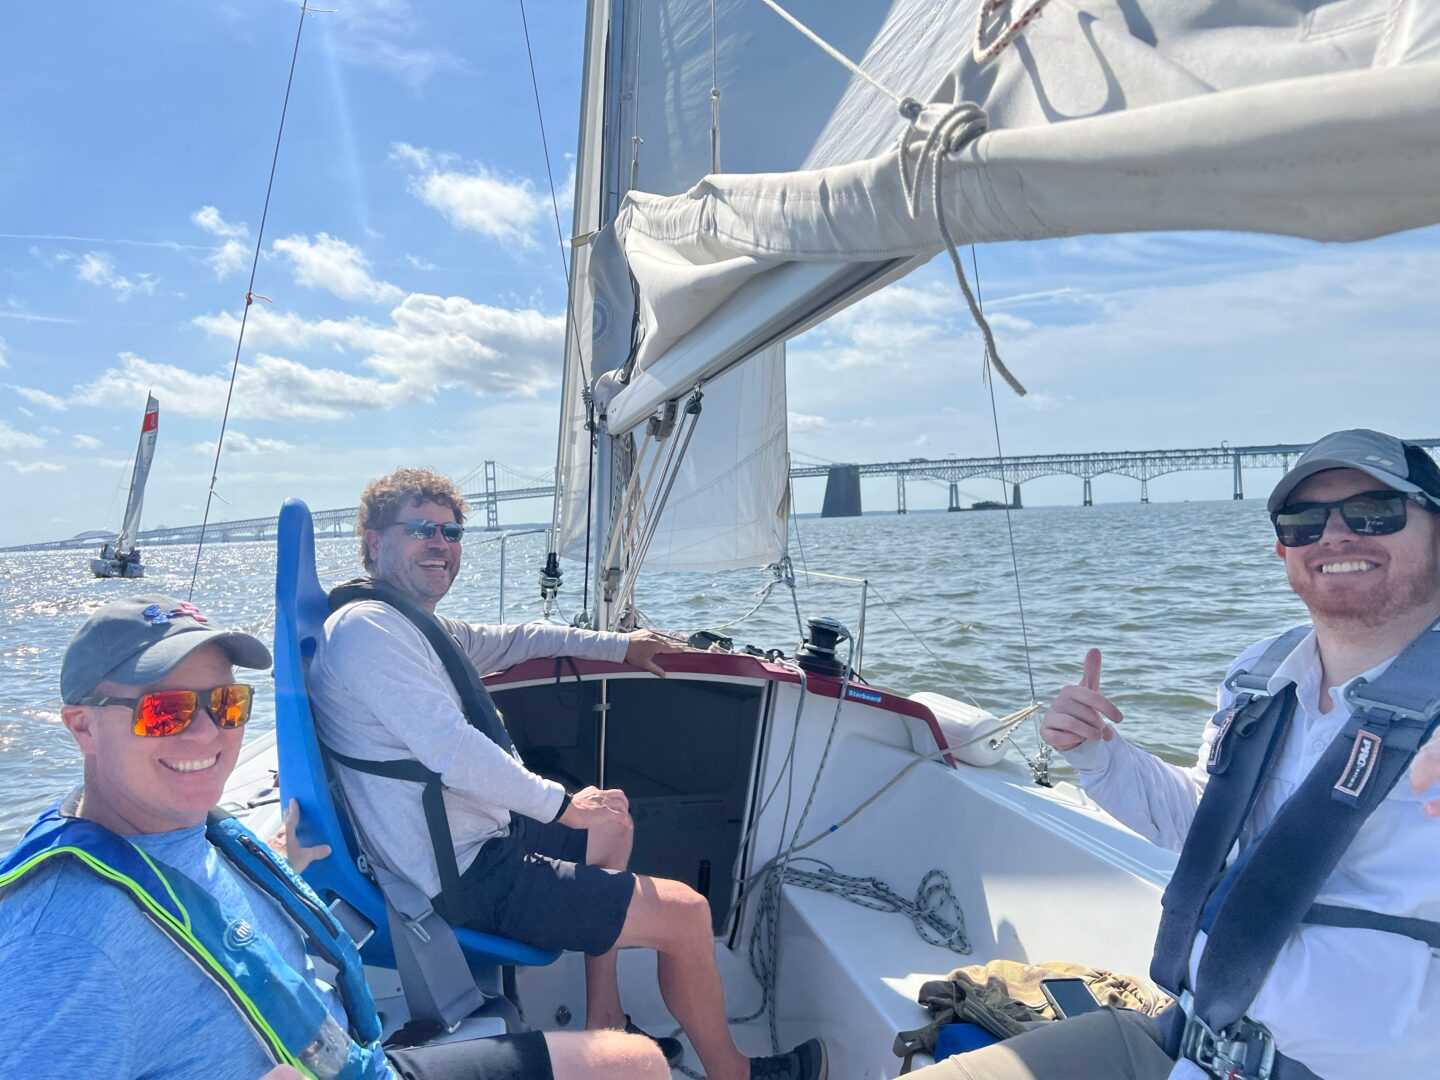 Photo of 3 CRAB volunteers and participants in one of CRAB's sailboats on the water competing and enjoying the regatta.  